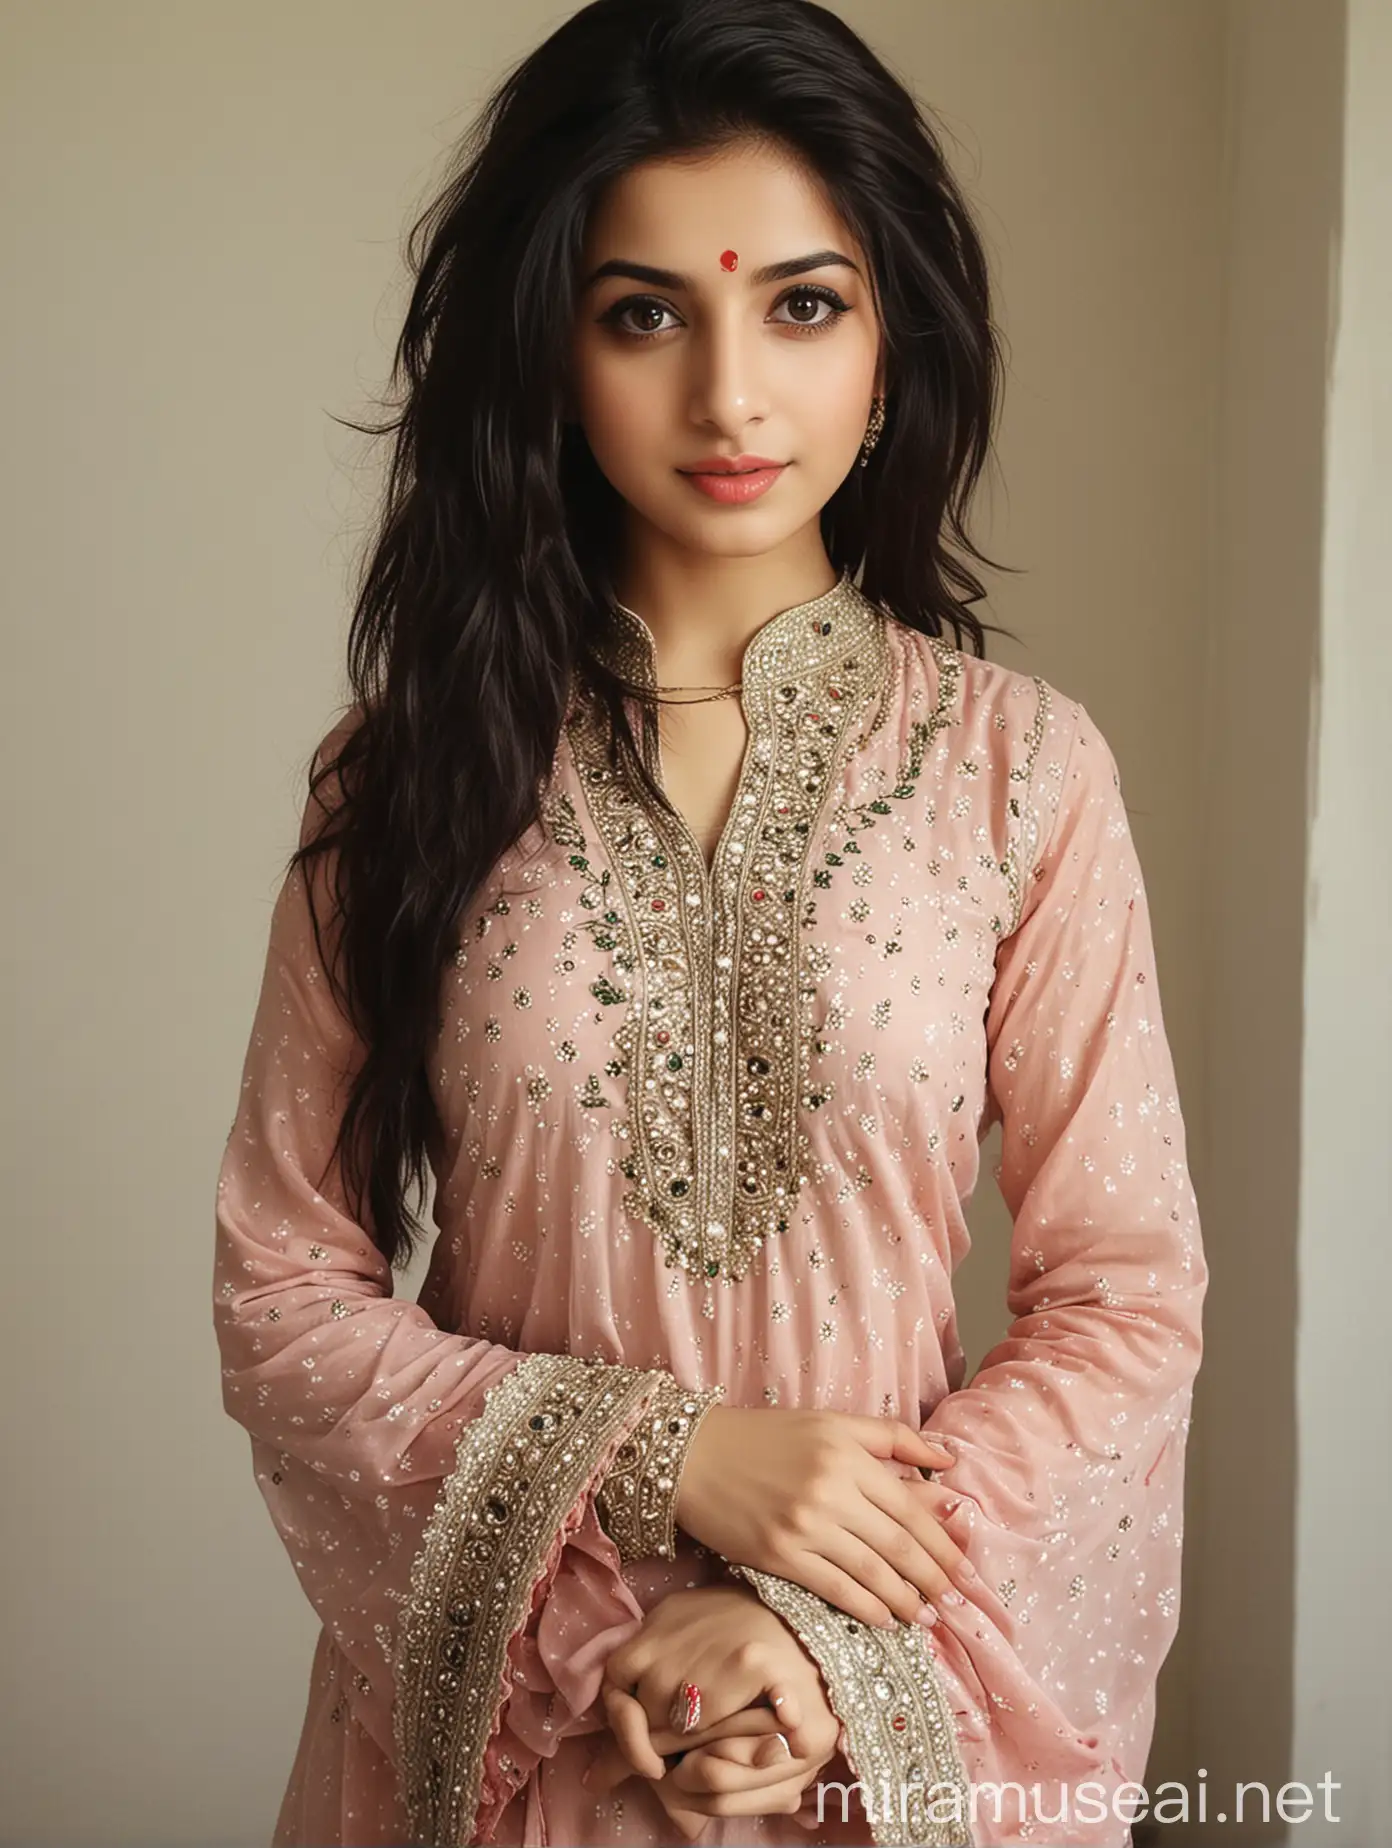 Pakistani girl,, hot and sexy,, extreme cute,, Narrator  ,,Indian dress 